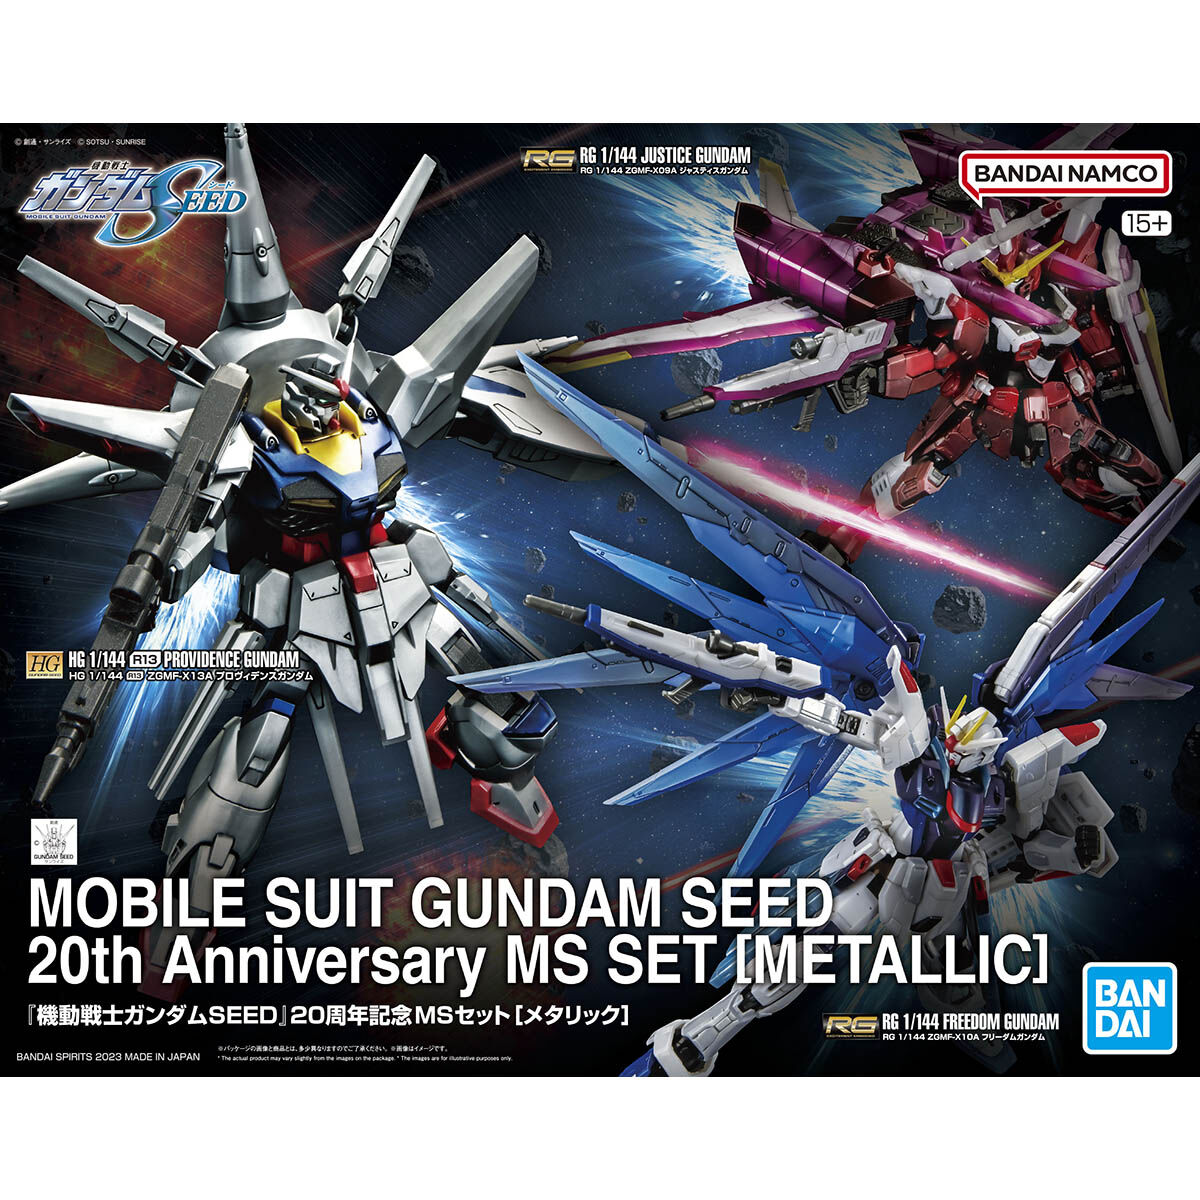 Event limited item "Mobile Suit Gundam SEED" 20th Anniversary MS Set [Metallic]